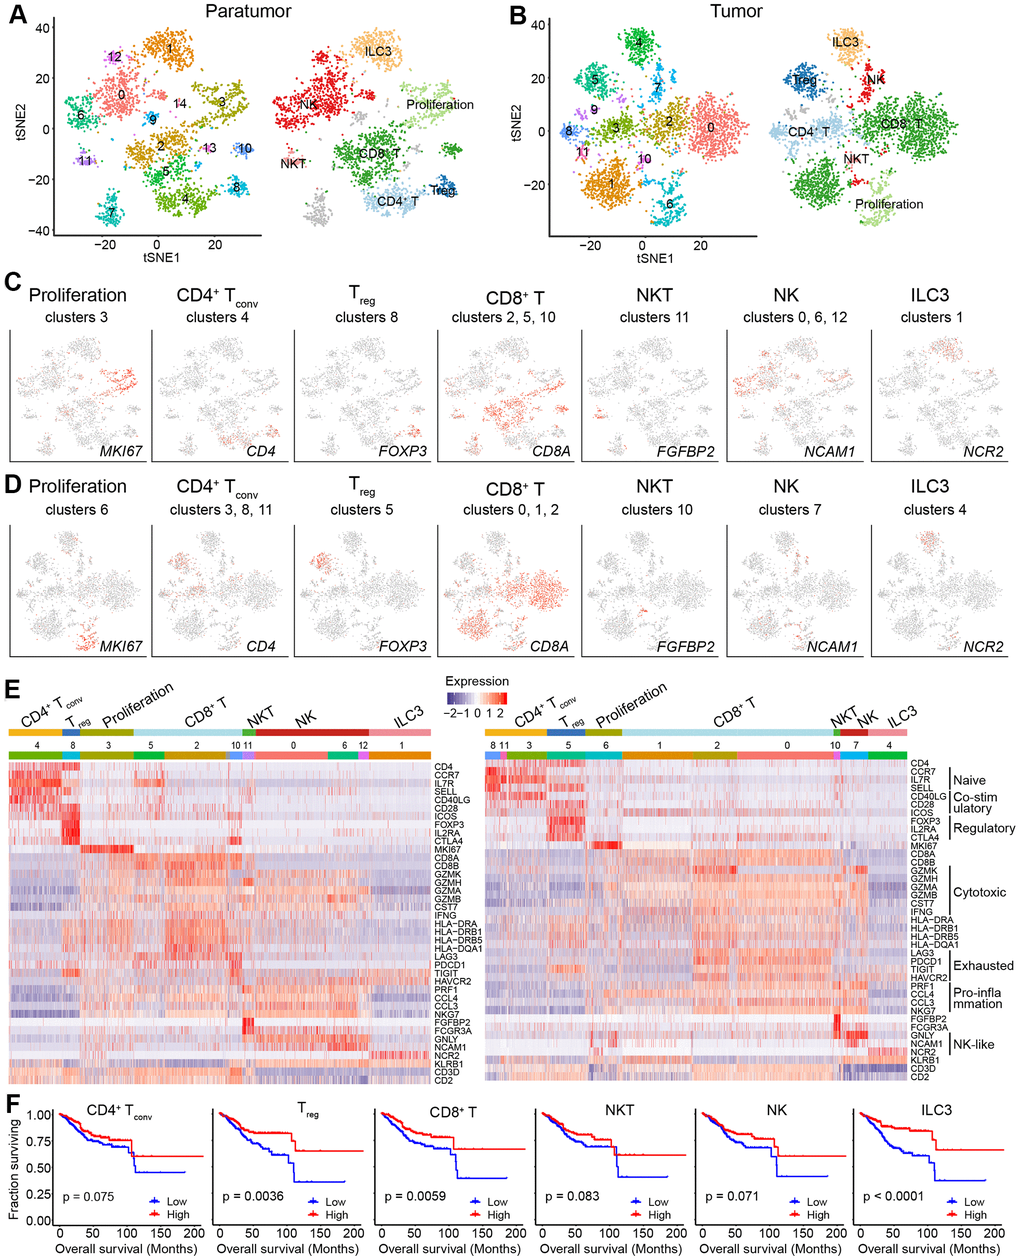 Lymphoid cell clusters in paratumors and endometrial tumors. (A, B) t-SNE plot of 3,223 lymphoid cells in Paratumor (A) and 3,712 lymphoid cells in Tumor (B), color-coded according to their associated cluster (left) or the assigned subtype (right). (C, D) t-SNE plot, color-coded to show the relative expression (gray to red) of marker genes for the lymphoid subtypes in Paratumor (C) and Tumor (D). (E) Heatmap created using known gene expression profiles of lymphoid cells in Paratumor (left panel) and Tumor (right panel). The gene expression profiles include marker genes for cell type and naive, costimulatory, regulatory, exhaustion and cytotoxicity expression signatures. The identity of each cluster was assigned with known markers. (F) The overall survival curves based on TCGA-UCEC data (n = 549 patients), stratified for the average expression (binary: high versus low) of tumor lymphoid cell marker genes.